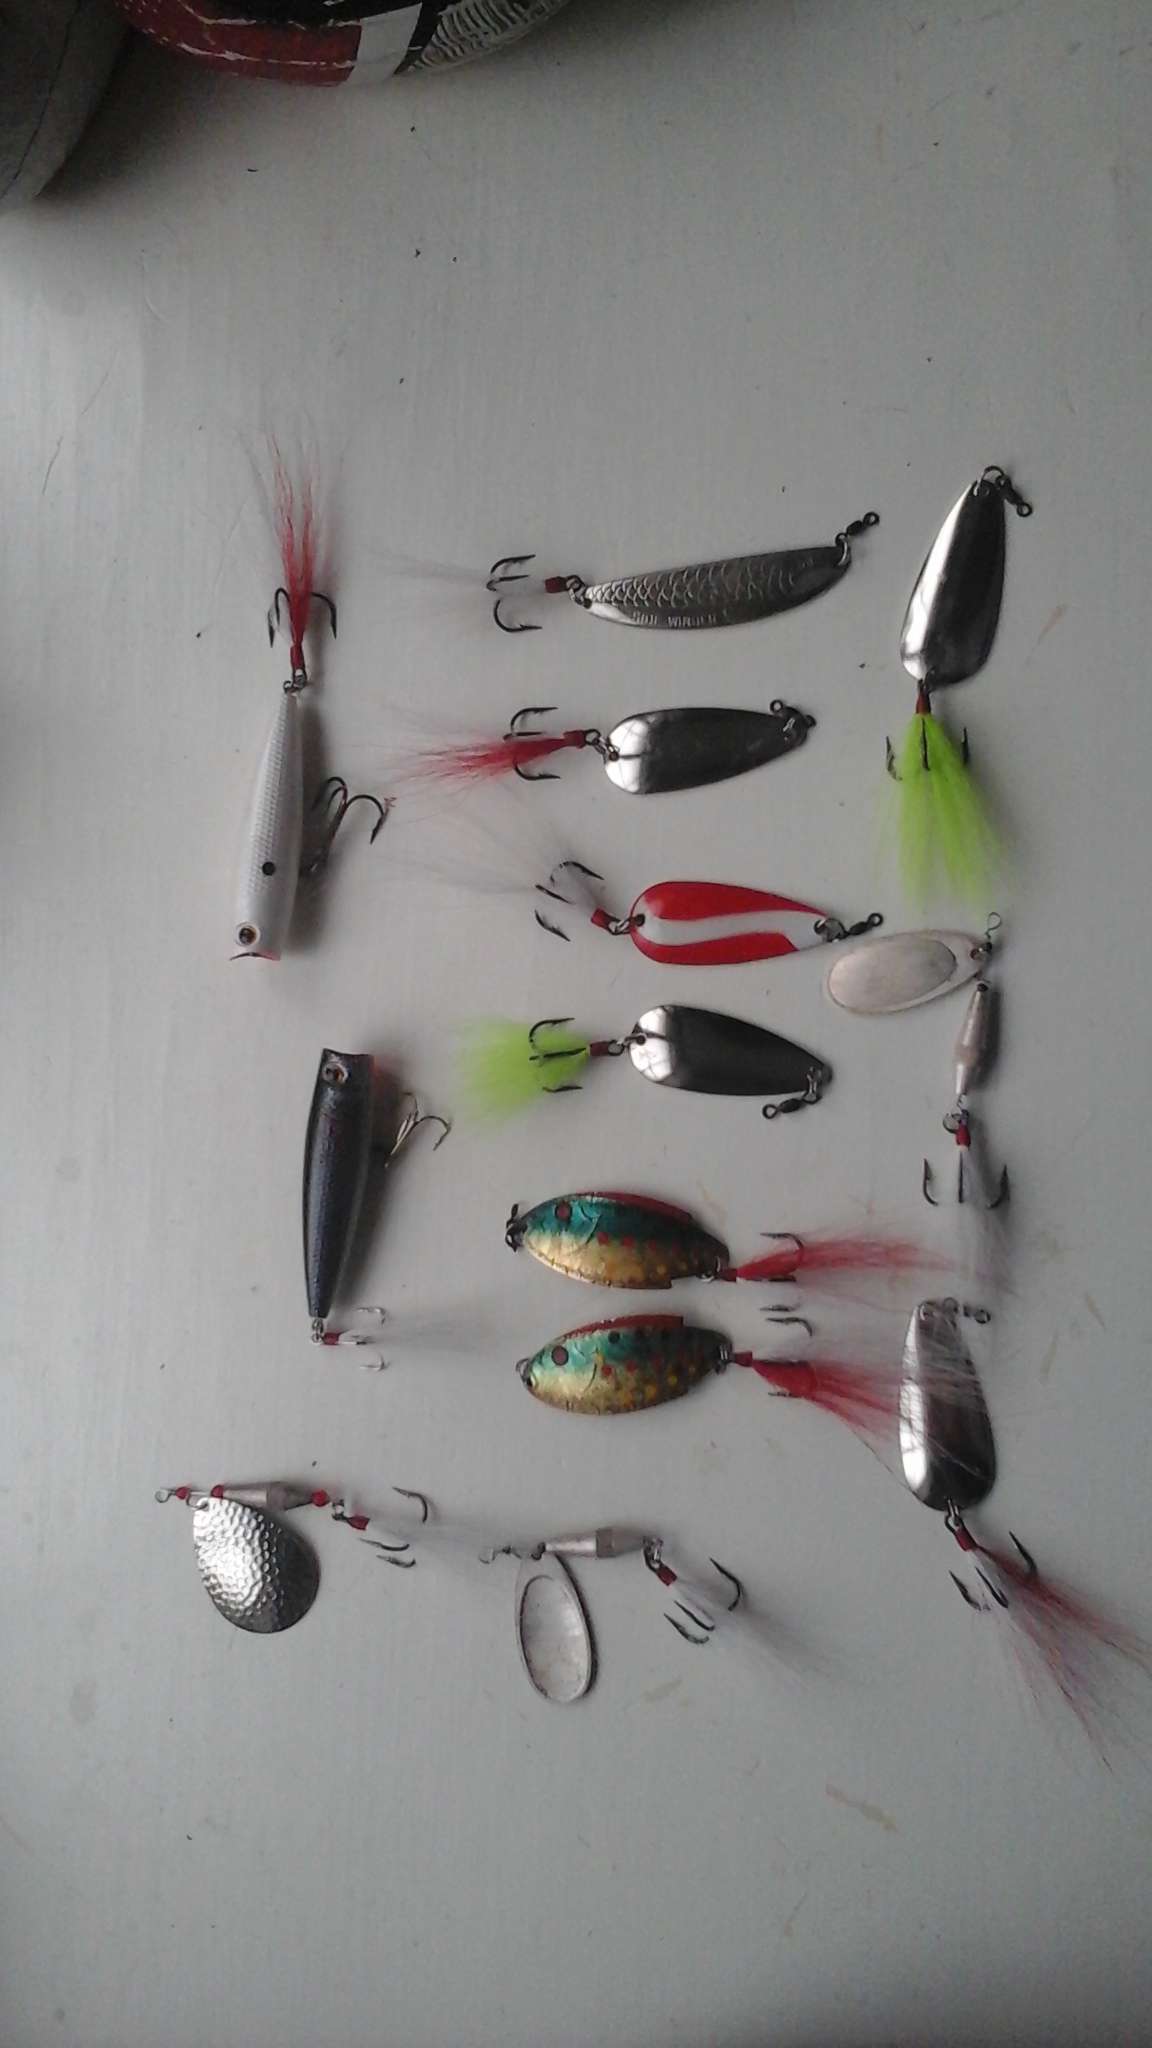 Are Dressed Treble Hooks Cosmetic? - Fishing Tackle - Bass Fishing Forums